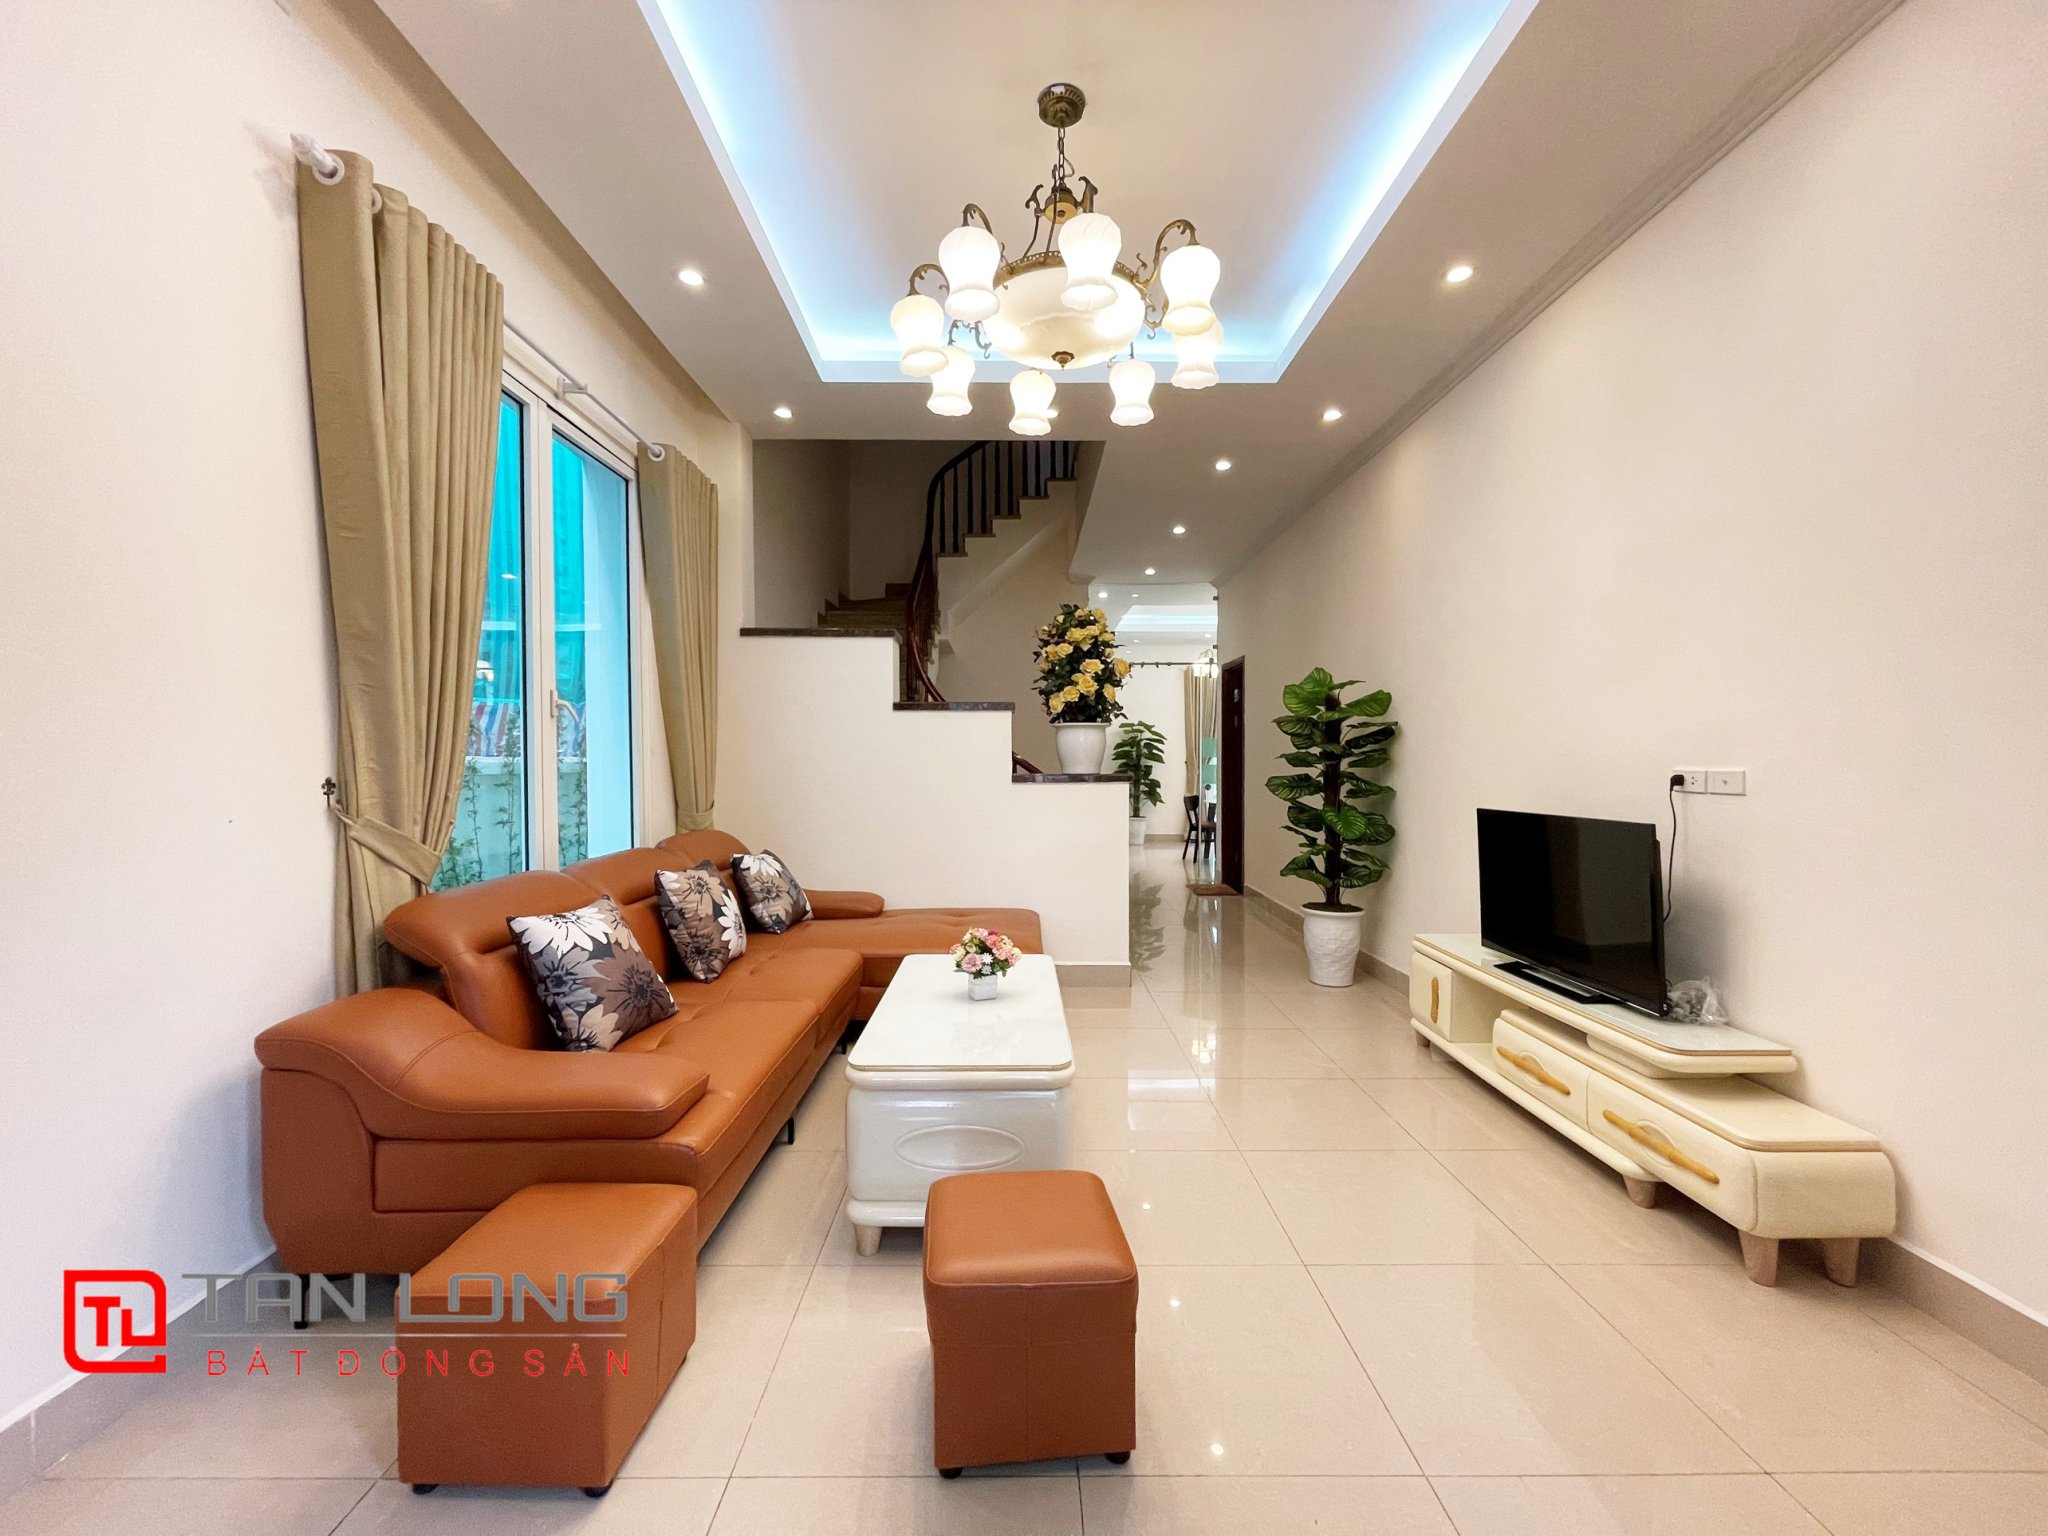 Fully furnished Duplex Villa for rent with a view of the fork in the river at Vinhomes Riverside